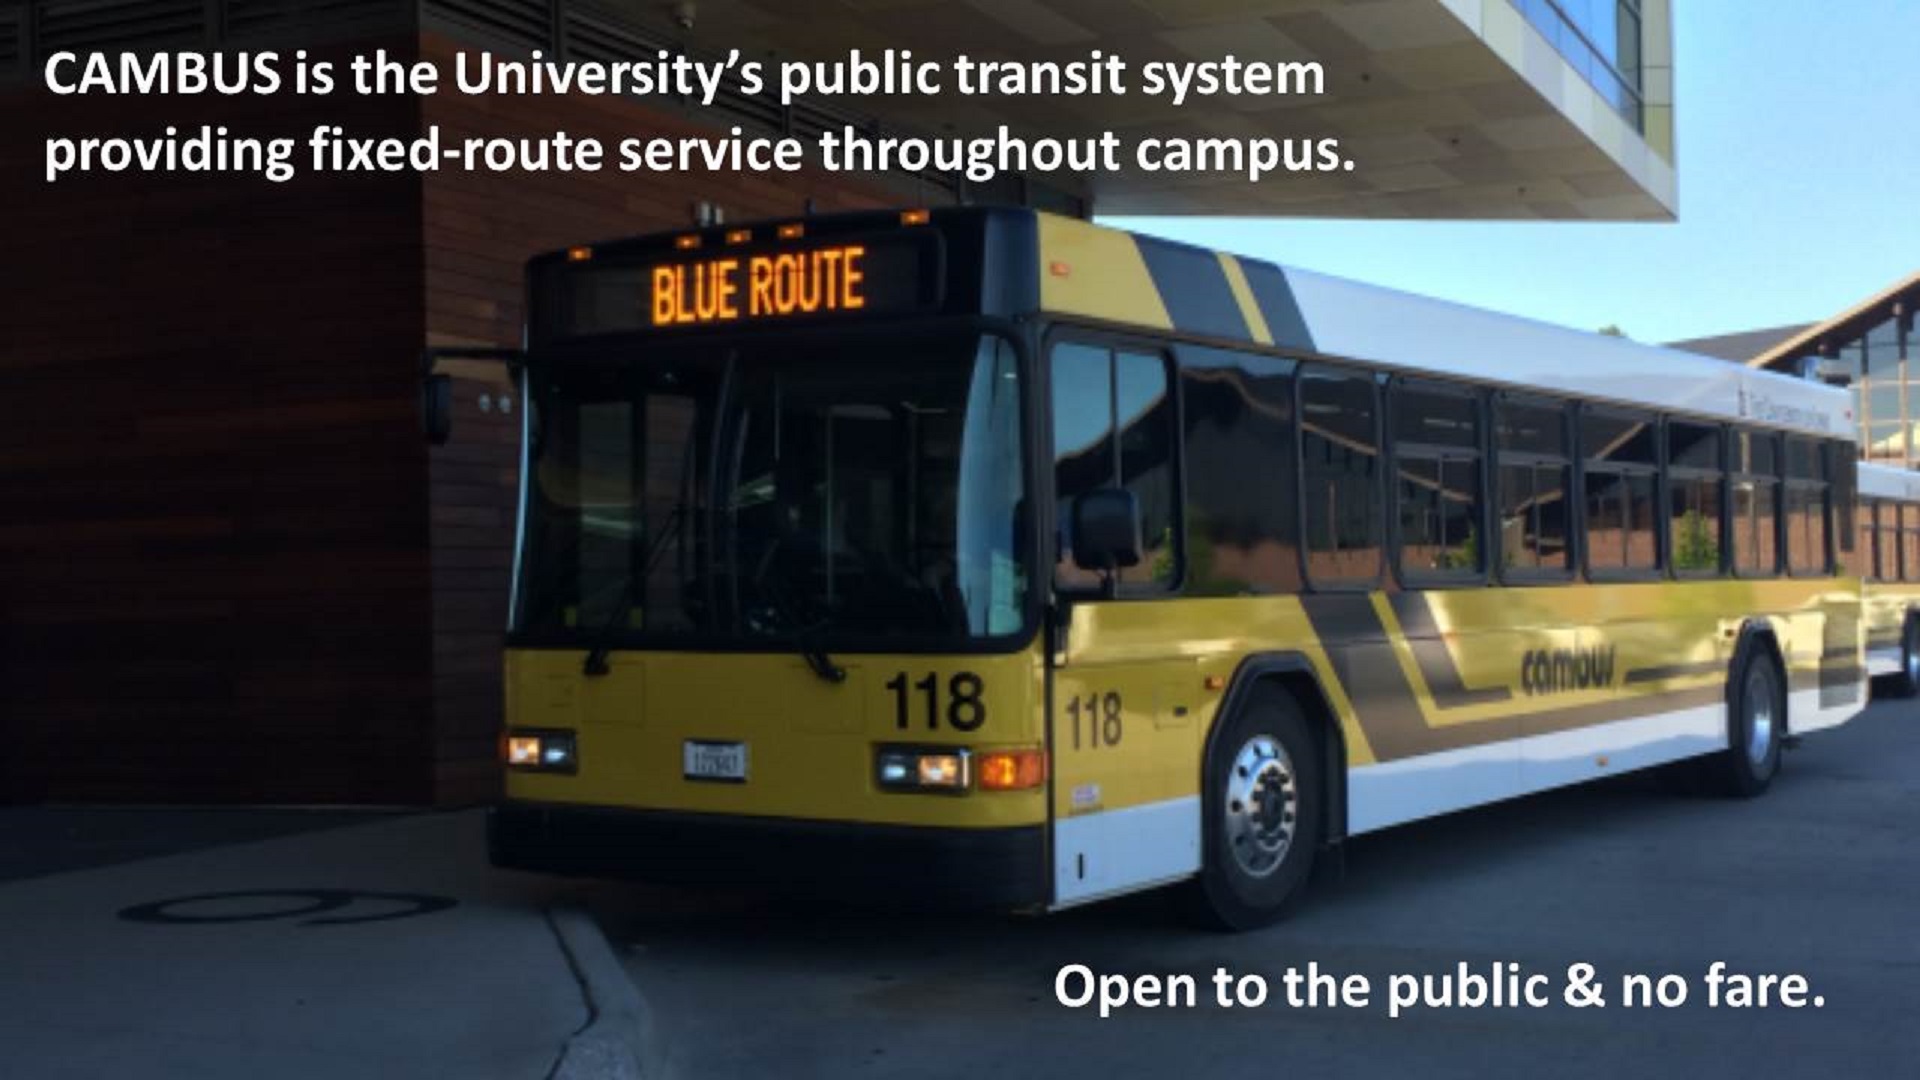 Cambus is the University's transit system